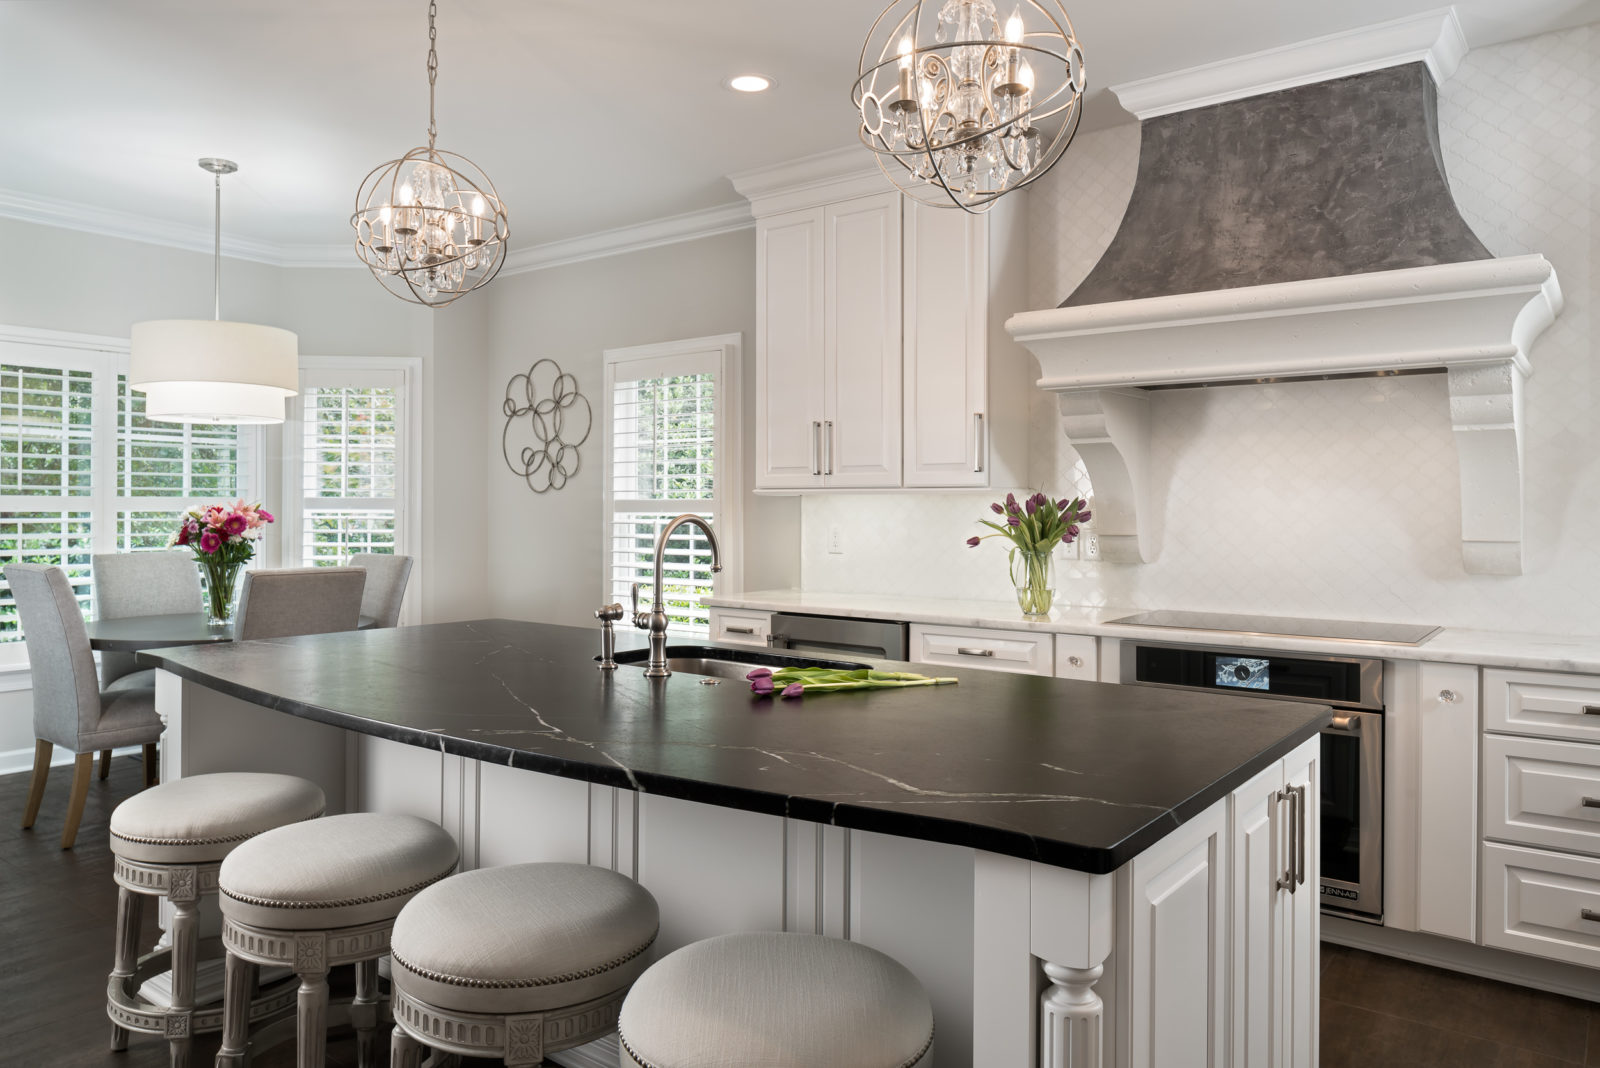 Black and white soapstone counters contrast with white cabinet in this Charlotte, NC kitchen